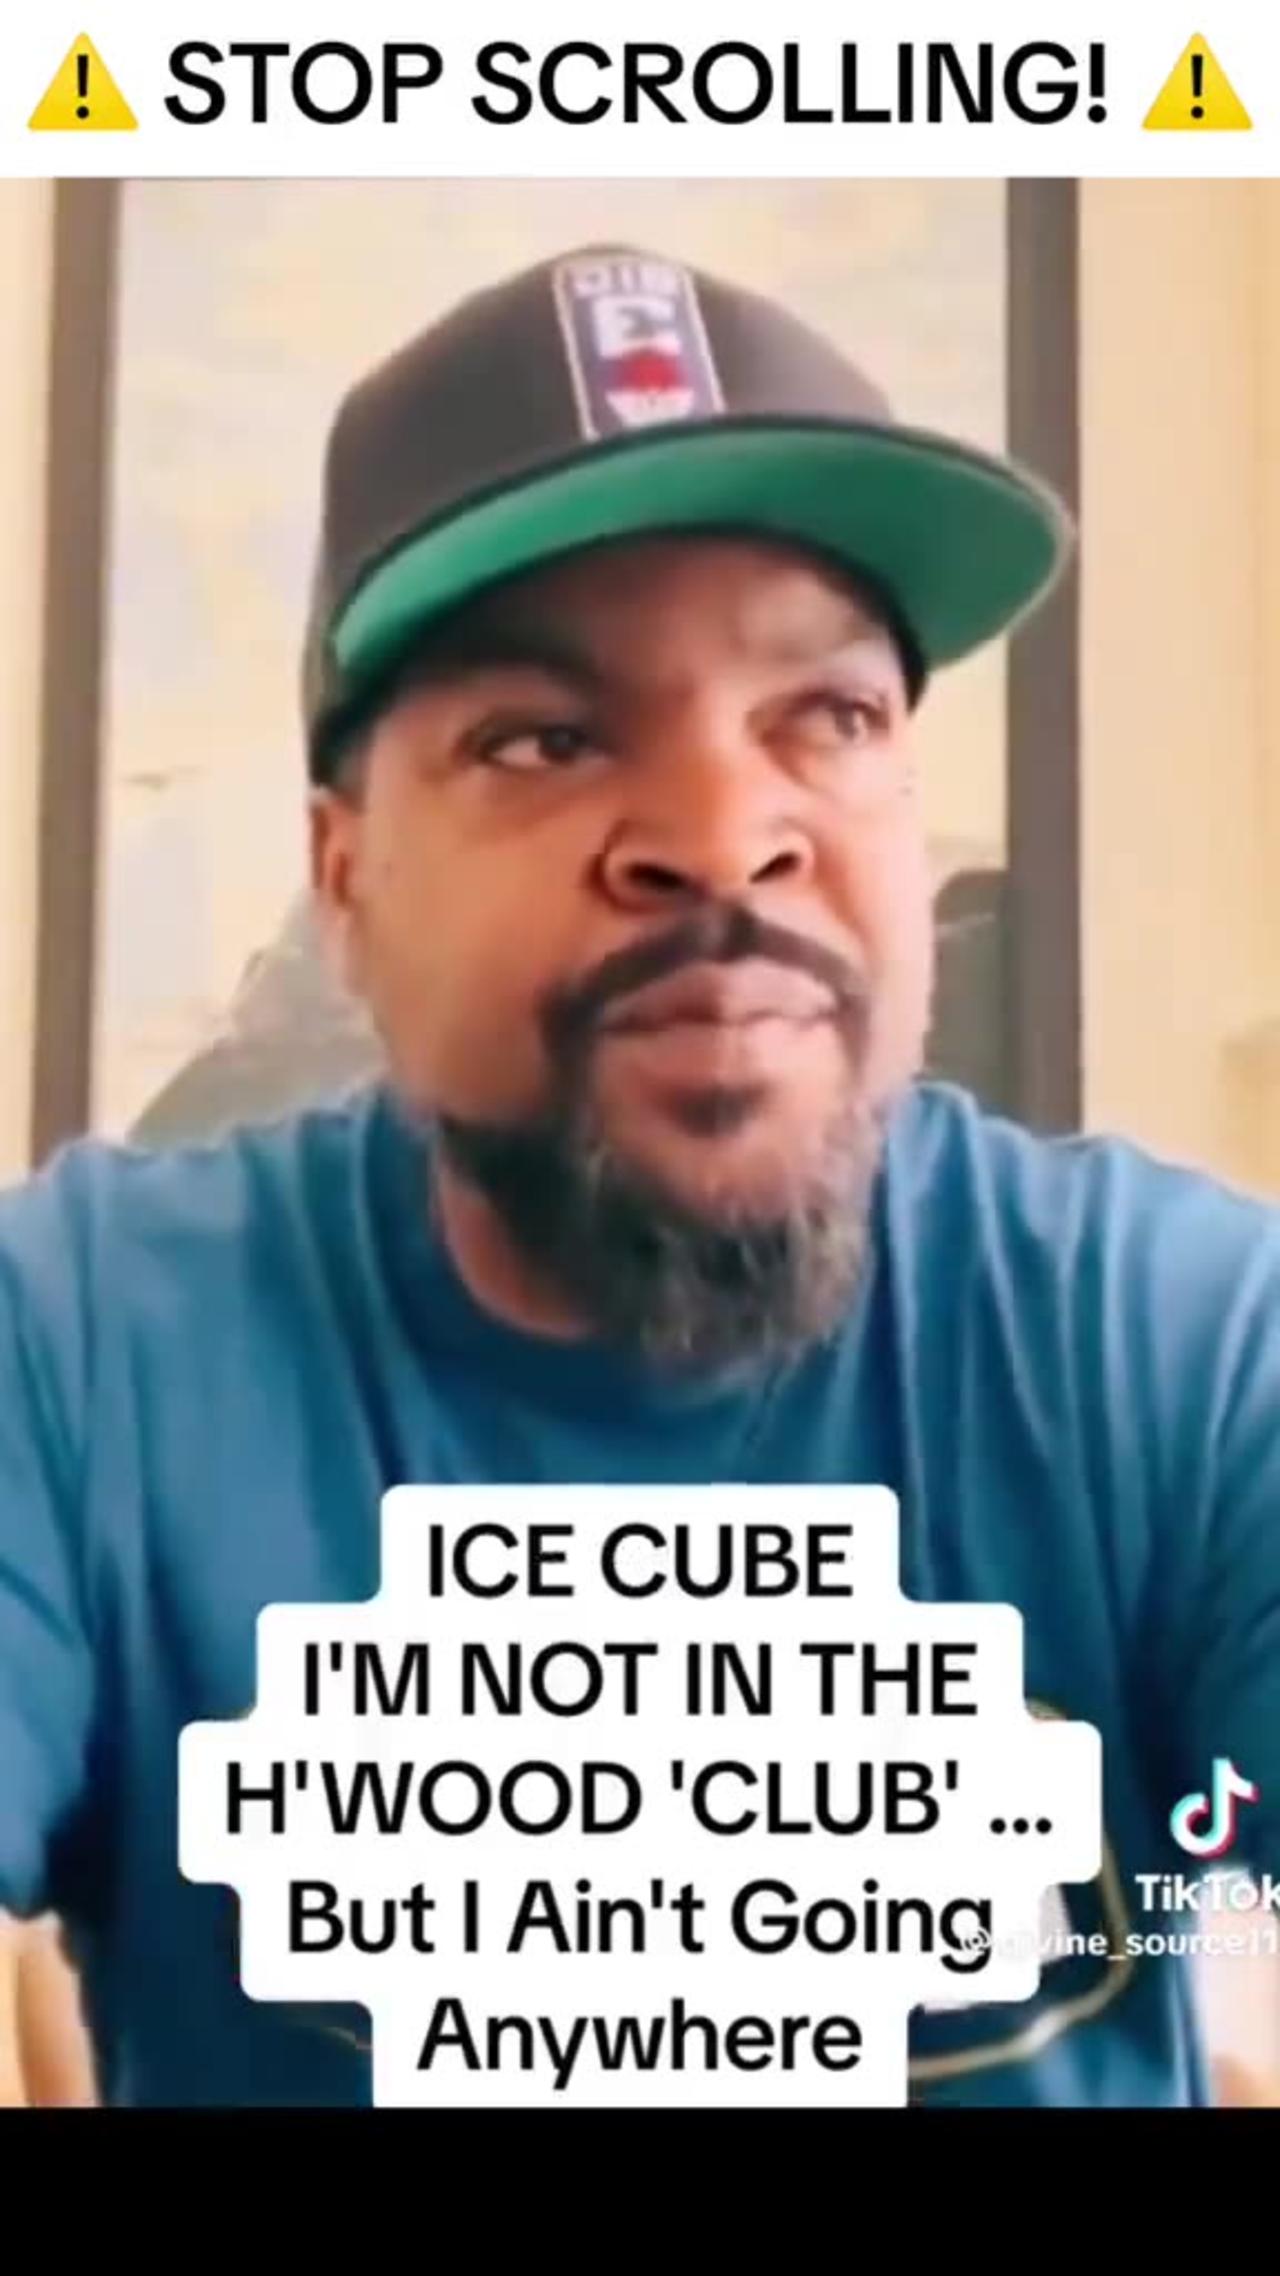 ICE CUBE SEPAKING ABOUT HIM NOT BEING A PART OF THE CLUB